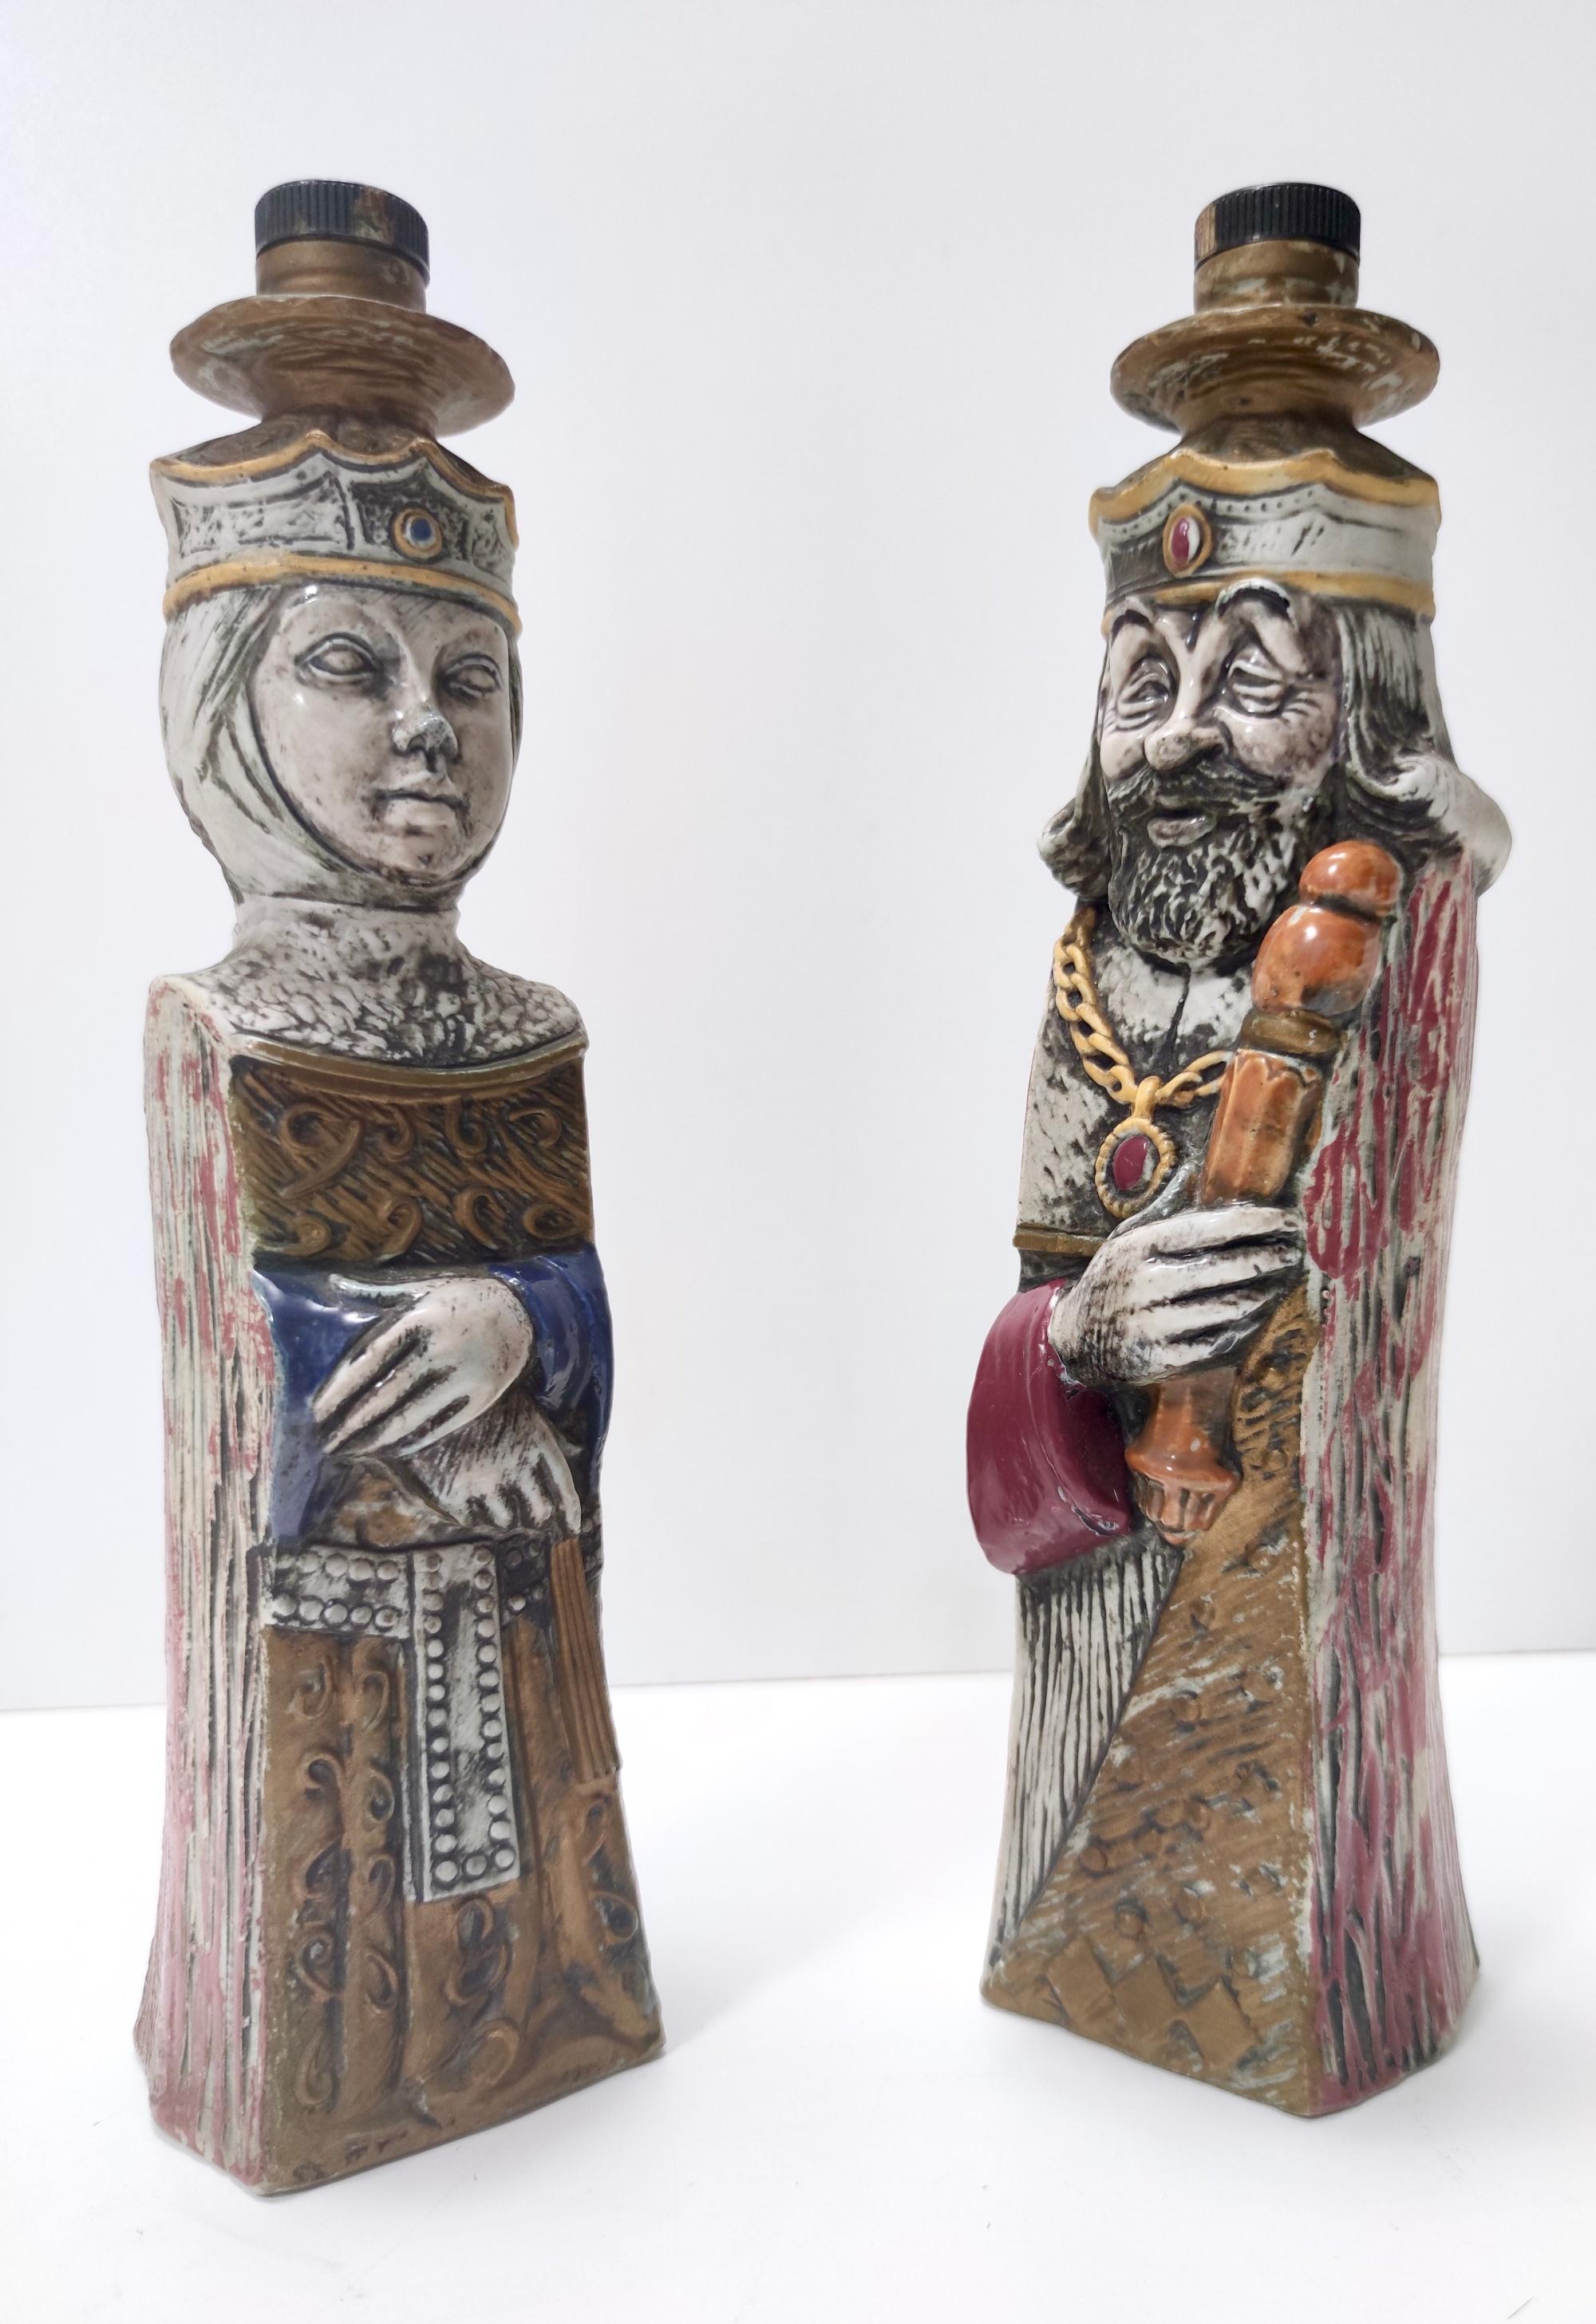 Made in Italy, 1960s.
These high-quality liquor bottles are made in polychrome ceramic.
They are vintage items, therefore they might show slight traces of use, but they can be considered as in excellent original condition and ready to become a